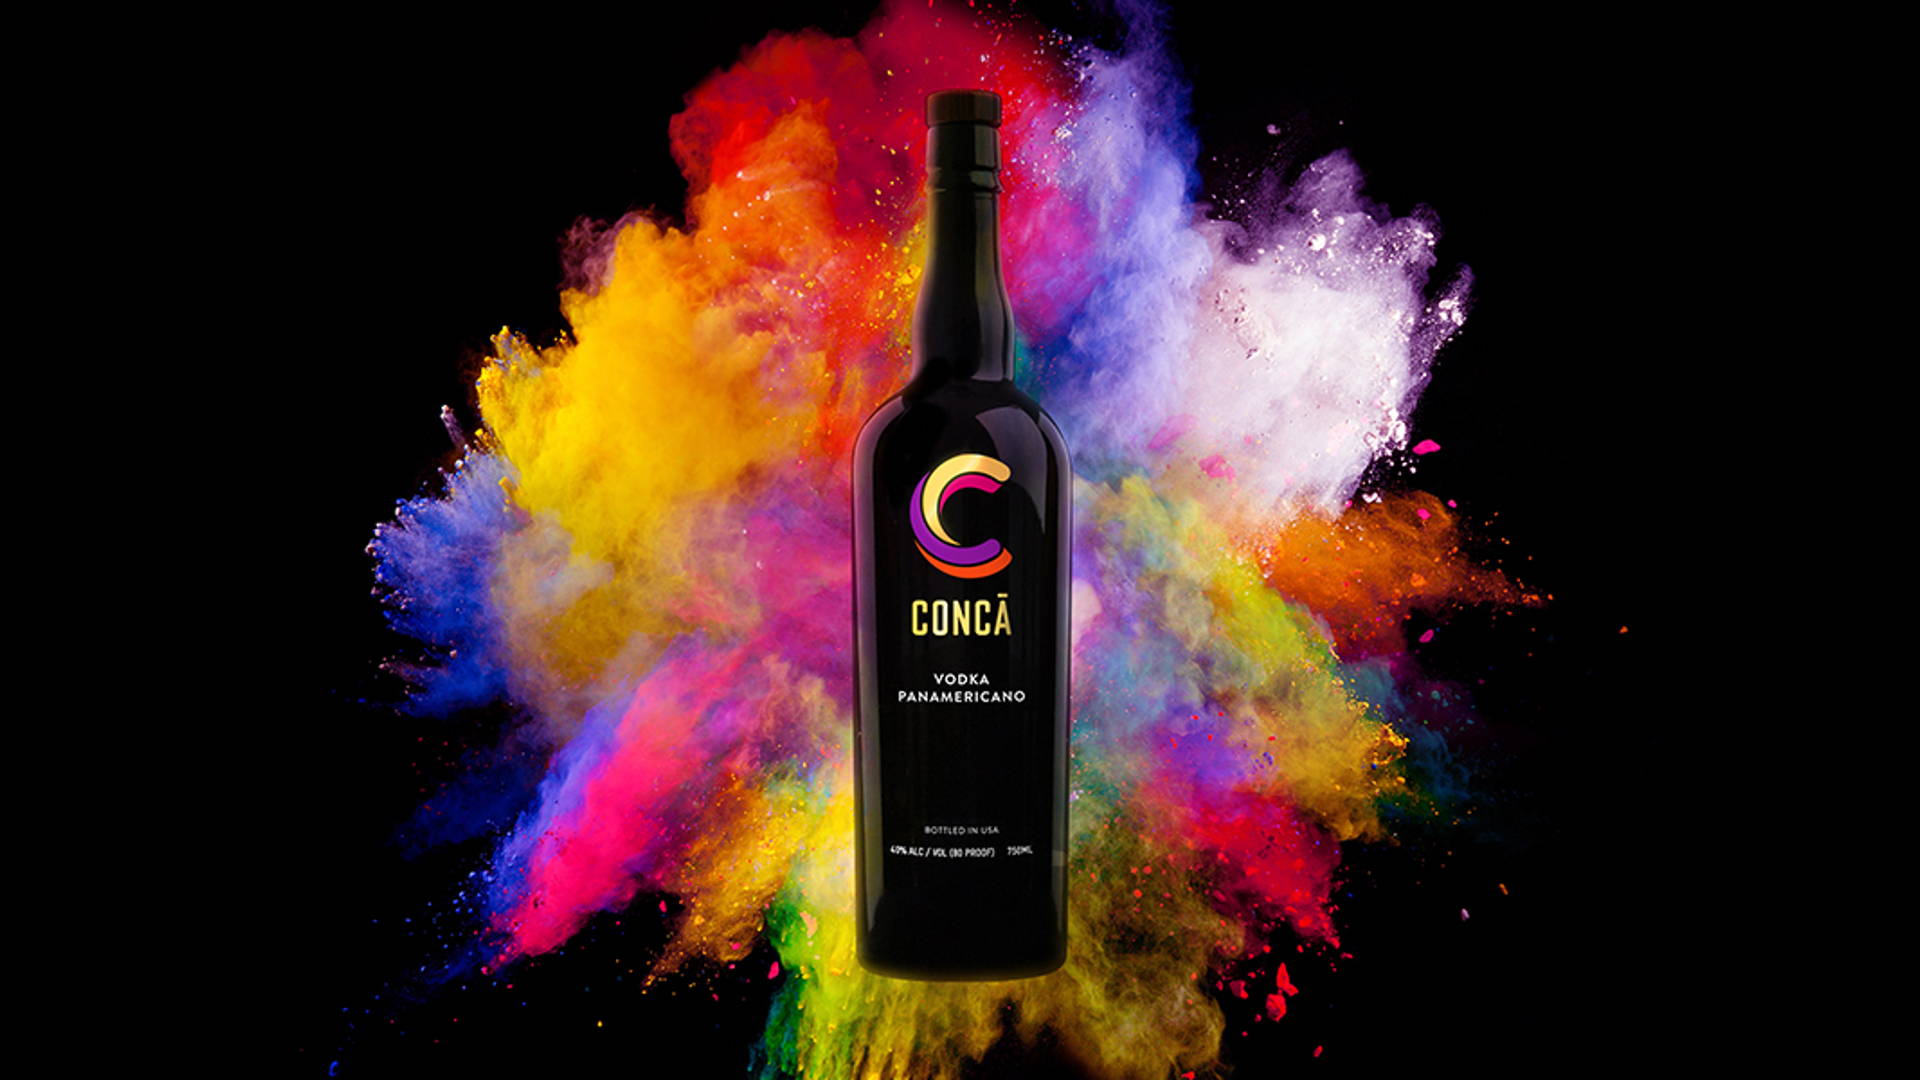 Featured image for Design Today: Concá Vodka Panamericano